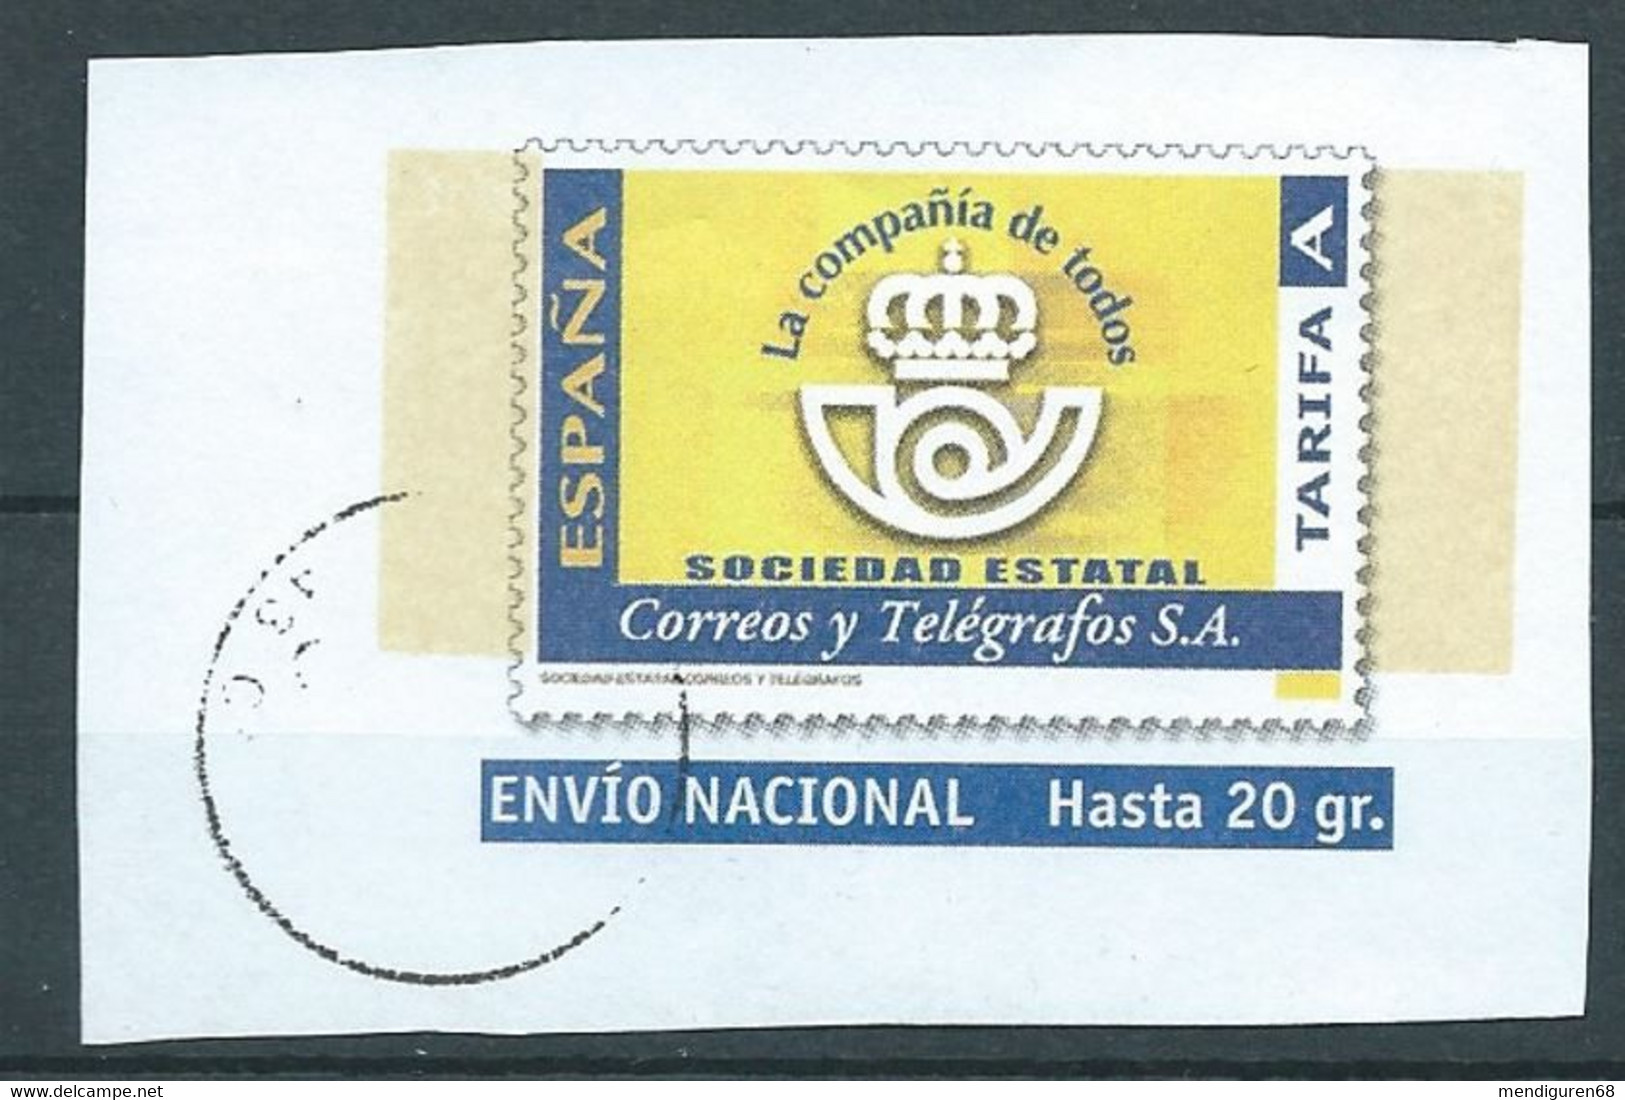 ESPAGNE SPANIEN SPAIN ESPAÑA 2022 LABEL PREFRANCHED ENVELOPE RATE A USED - Fiscal-postal